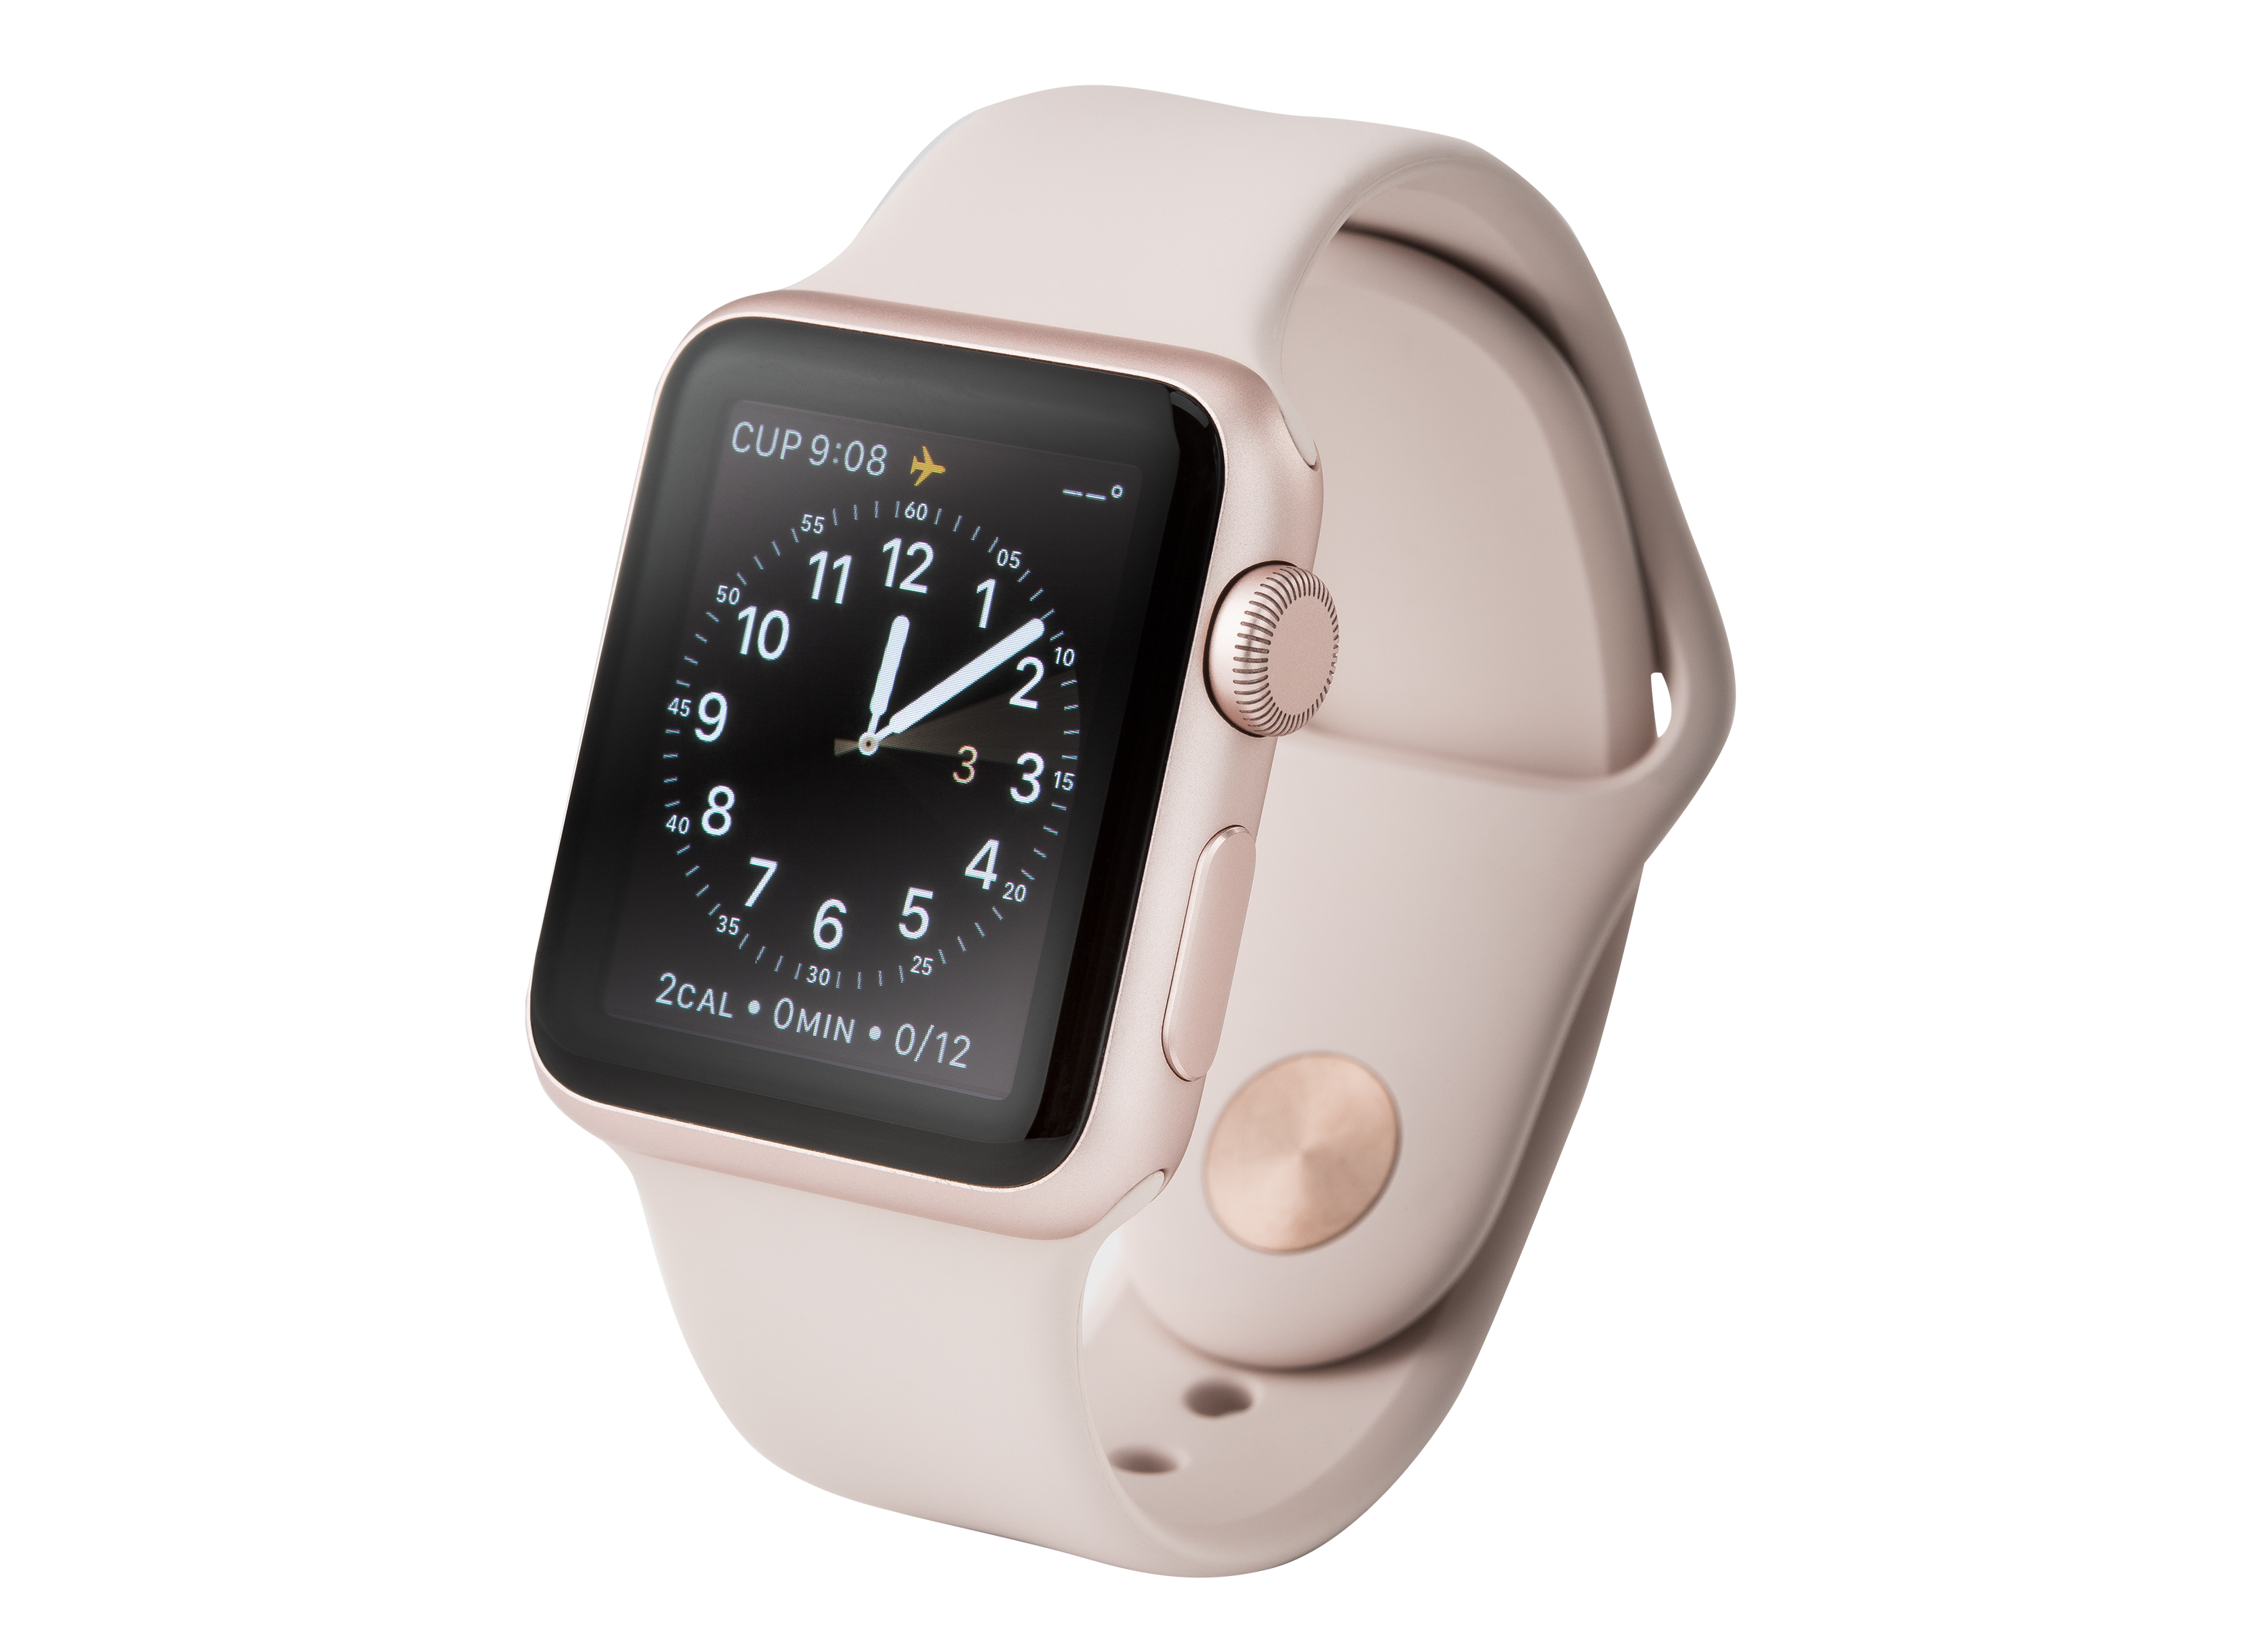 Apple Watch Series 1 (38mm) Smartwatch Review - Consumer Reports